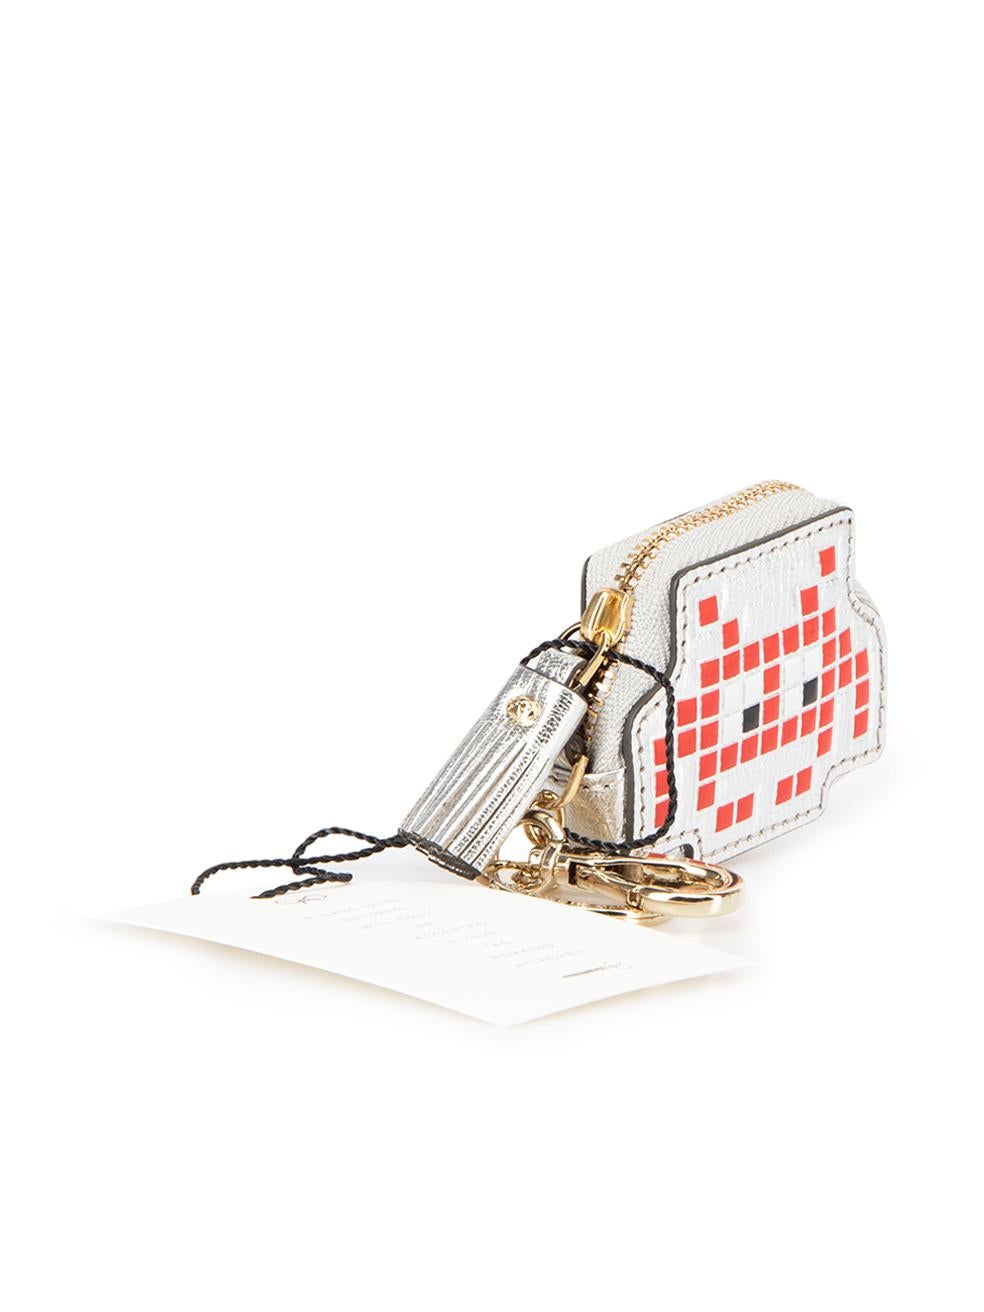 CONDITION is Never worn, with tags. No visible wear to pouch is evident on this new Anya Hindmarch designer resale item. This item includes the original dustbag and box.



Details


Silver

Leather

Mini coin pouch

Space invader design in red

Zip